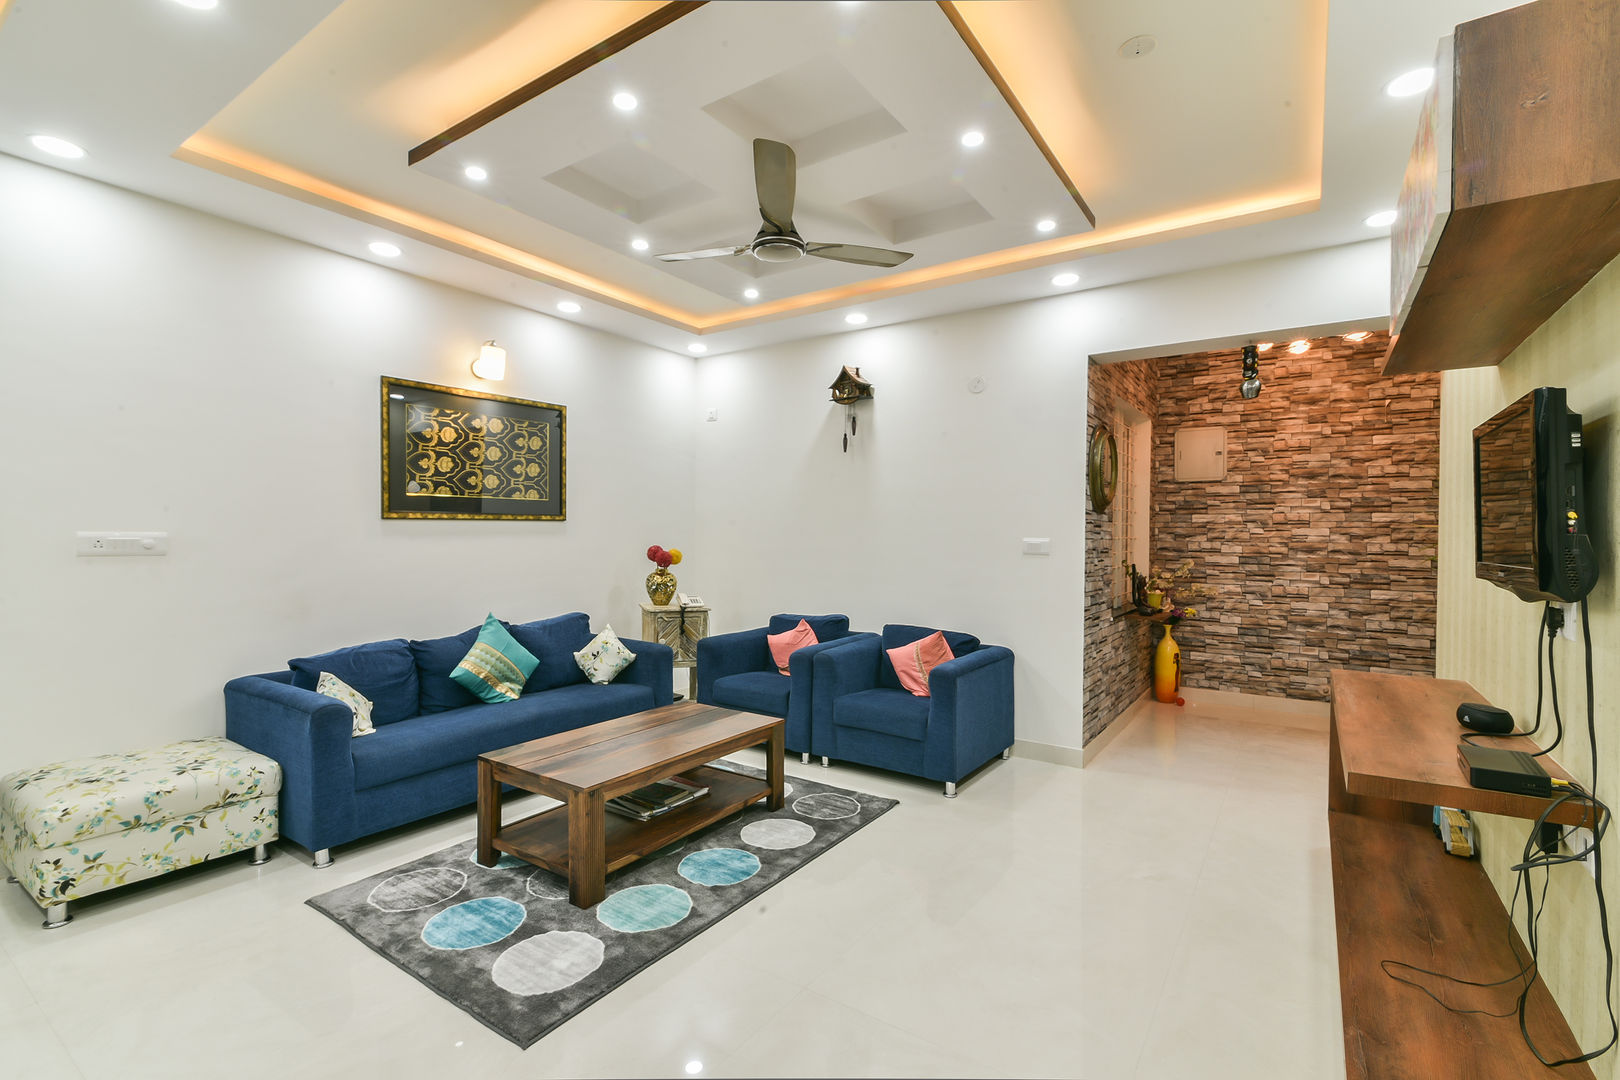 Gloryfields Apartment - Bangalore, Wenzelsmith Interior Design Pvt Ltd Wenzelsmith Interior Design Pvt Ltd Classic style living room Picture frame,Couch,Table,Comfort,Lighting,Wood,studio couch,Interior design,House,Floor